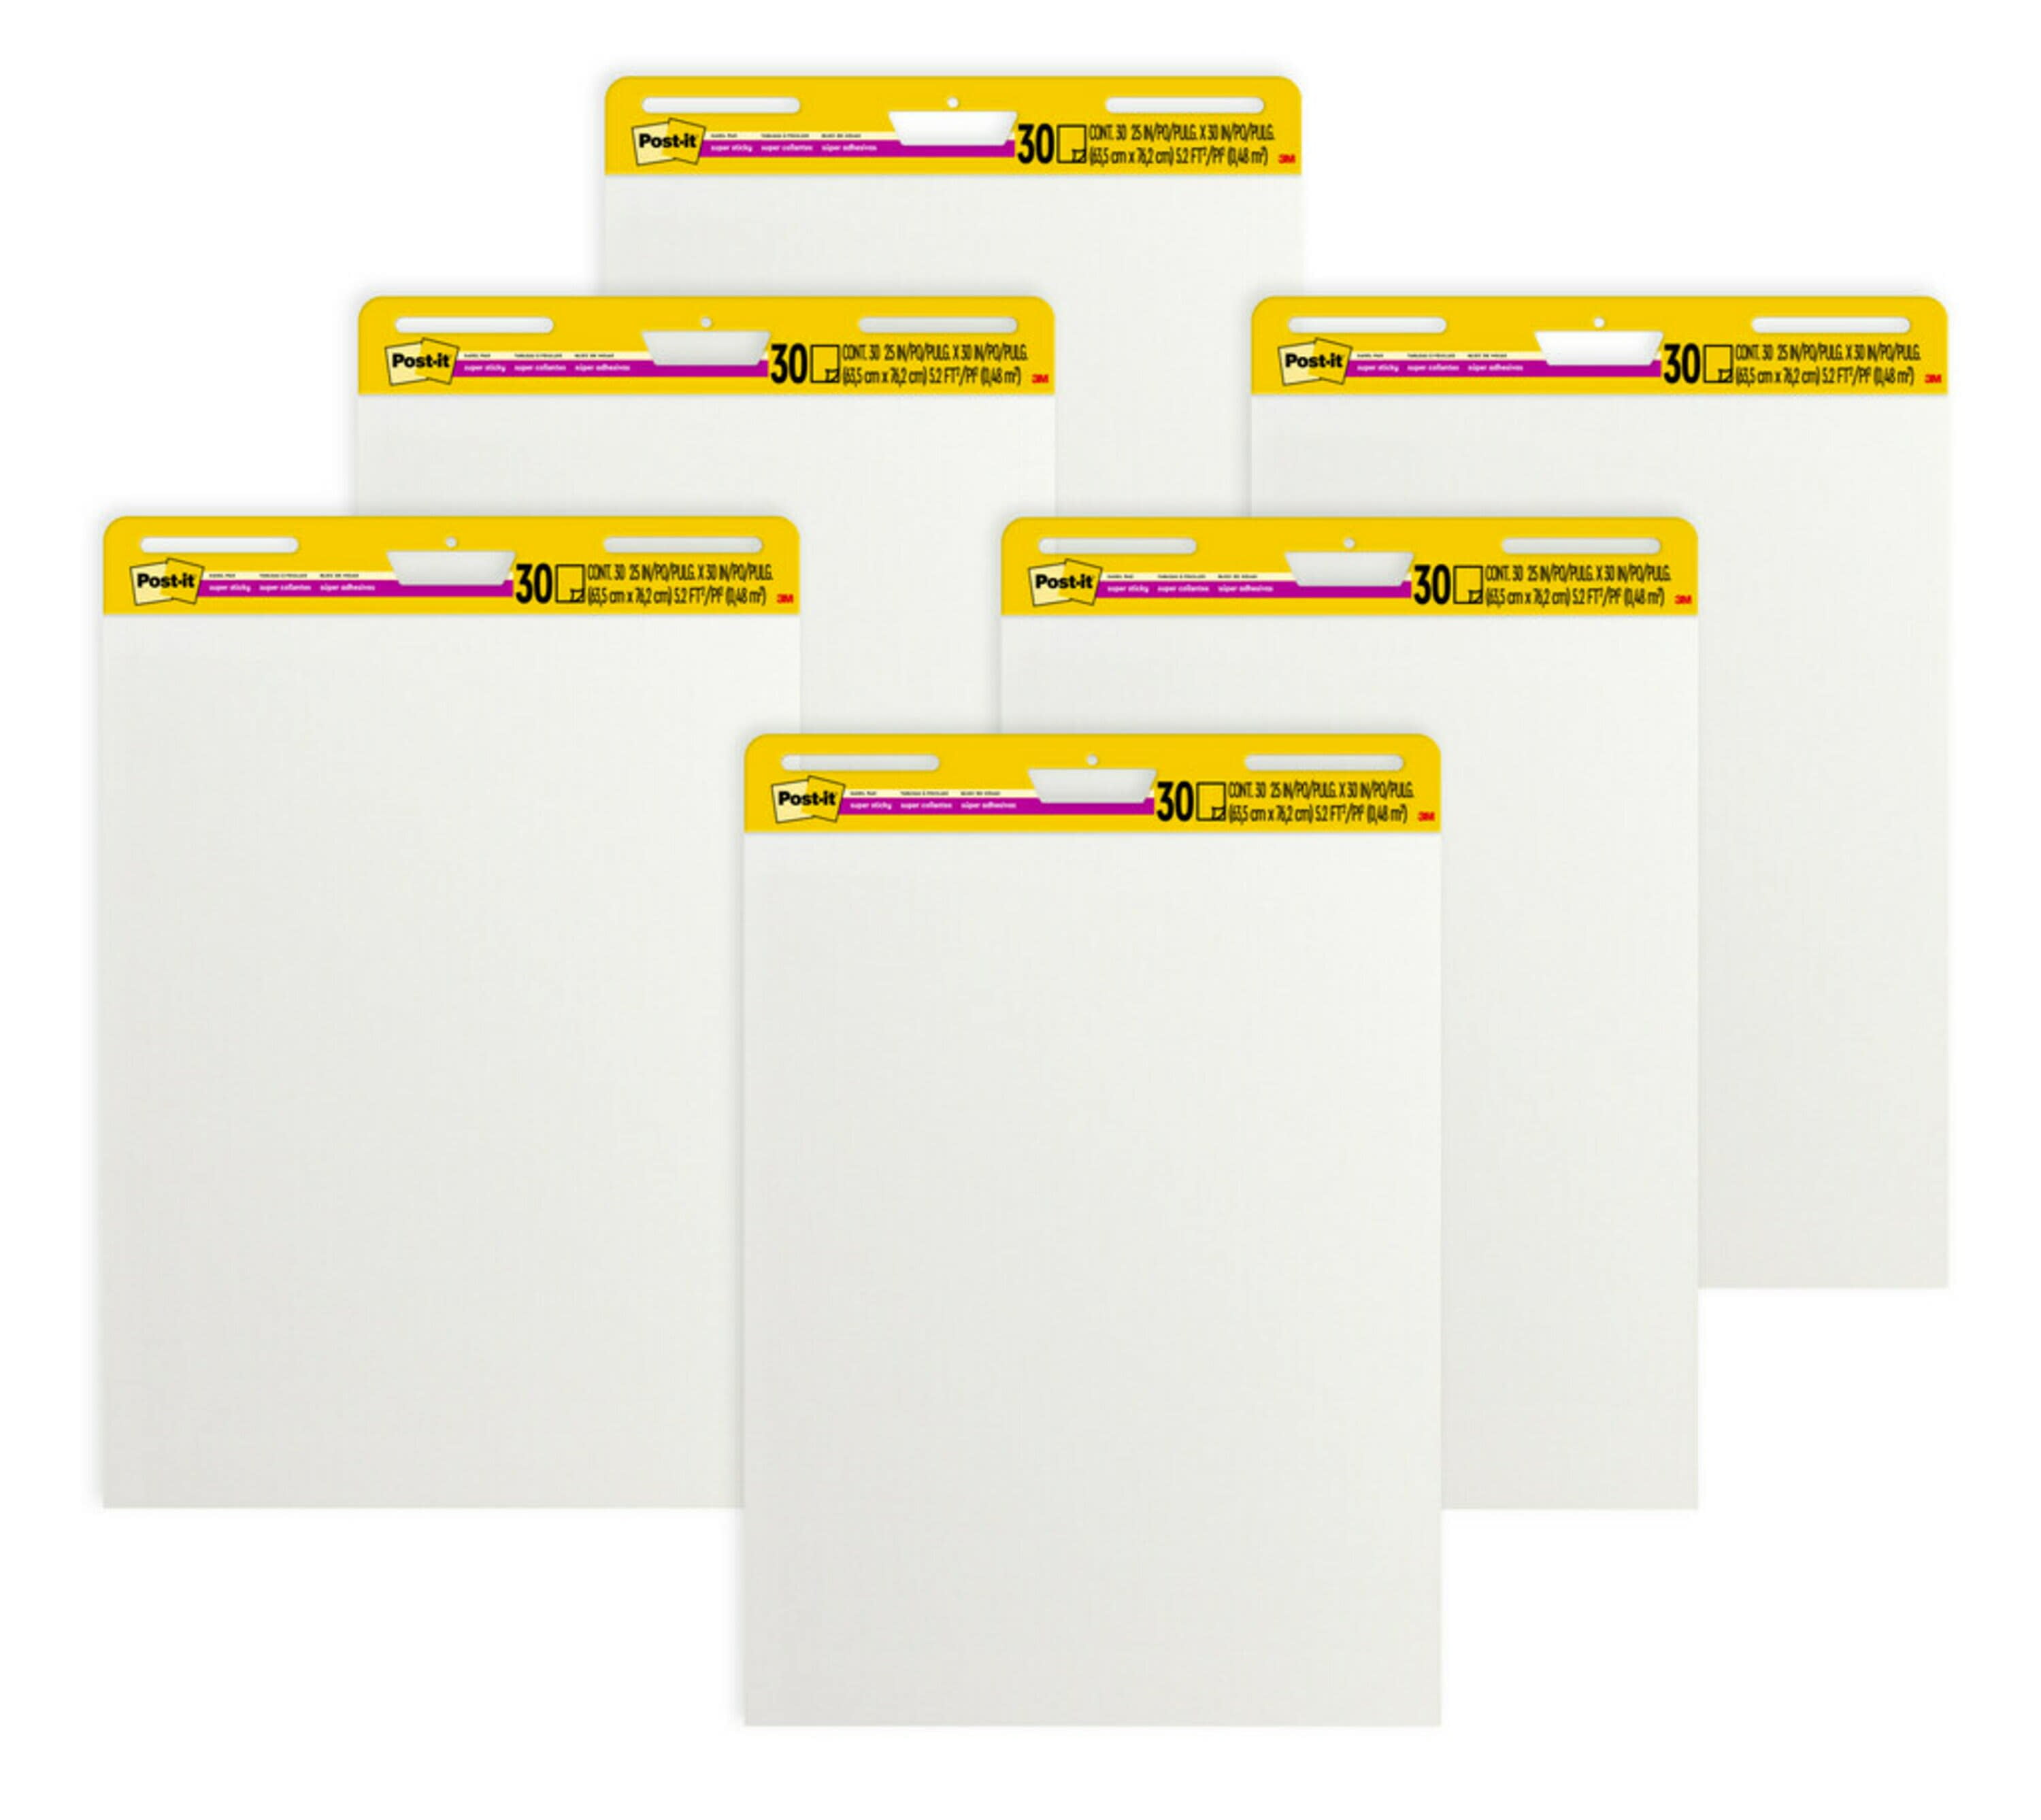 Post-it Self-Stick Easel Pad, Yellow, 25 x 30.5 - 30 sheets